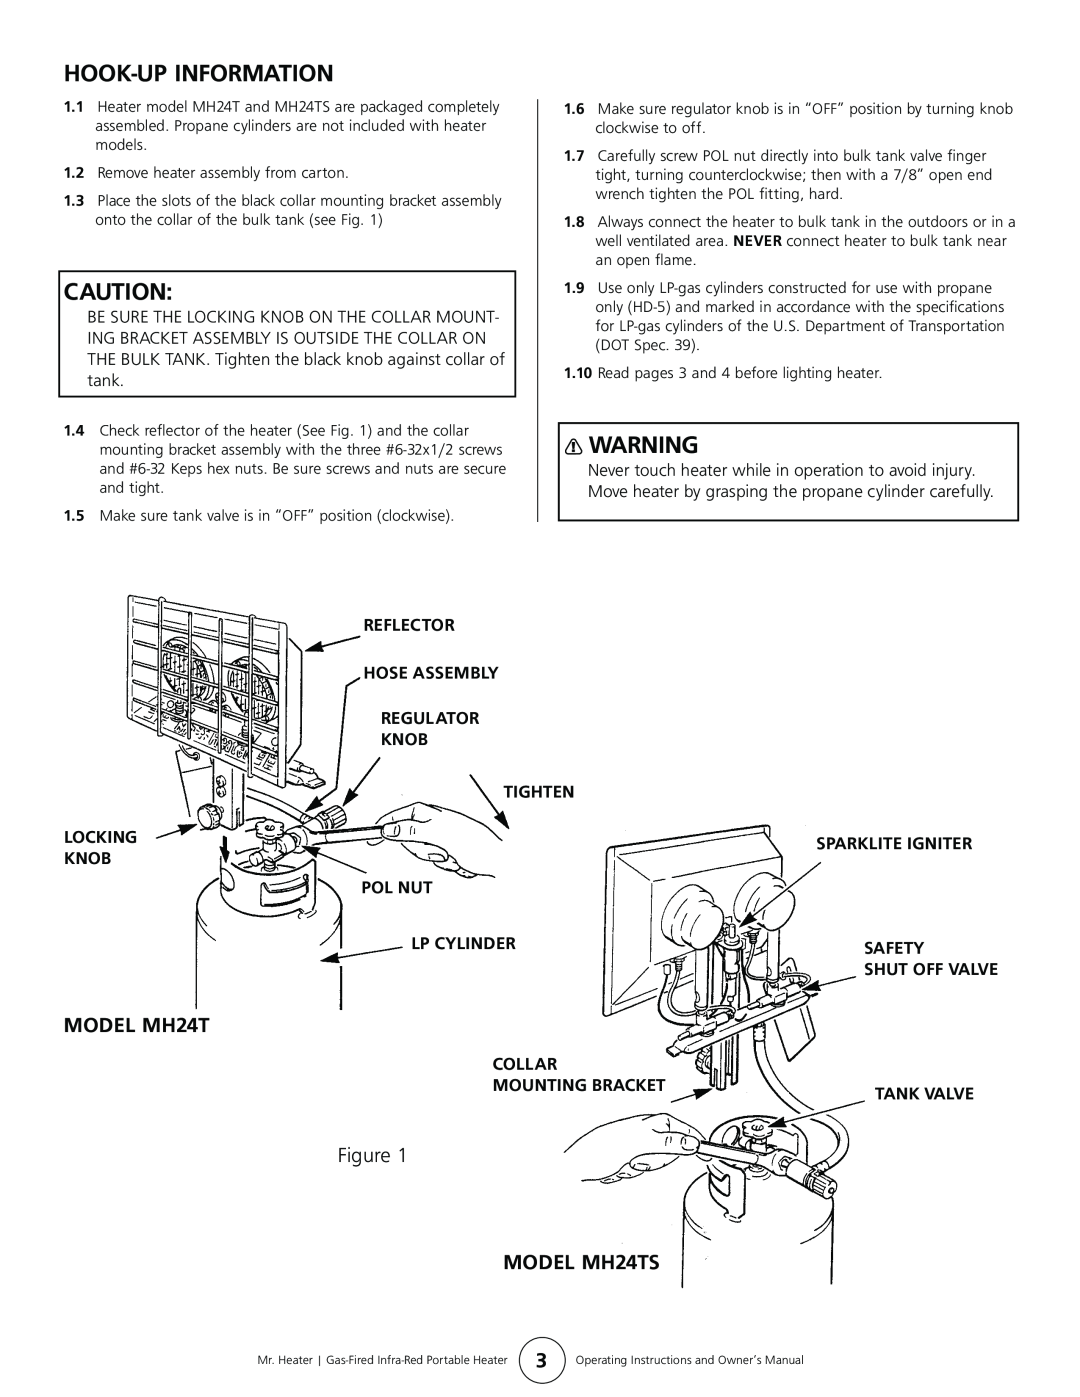 Enerco owner manual Hook-Up Information, MODEL MH24TS 